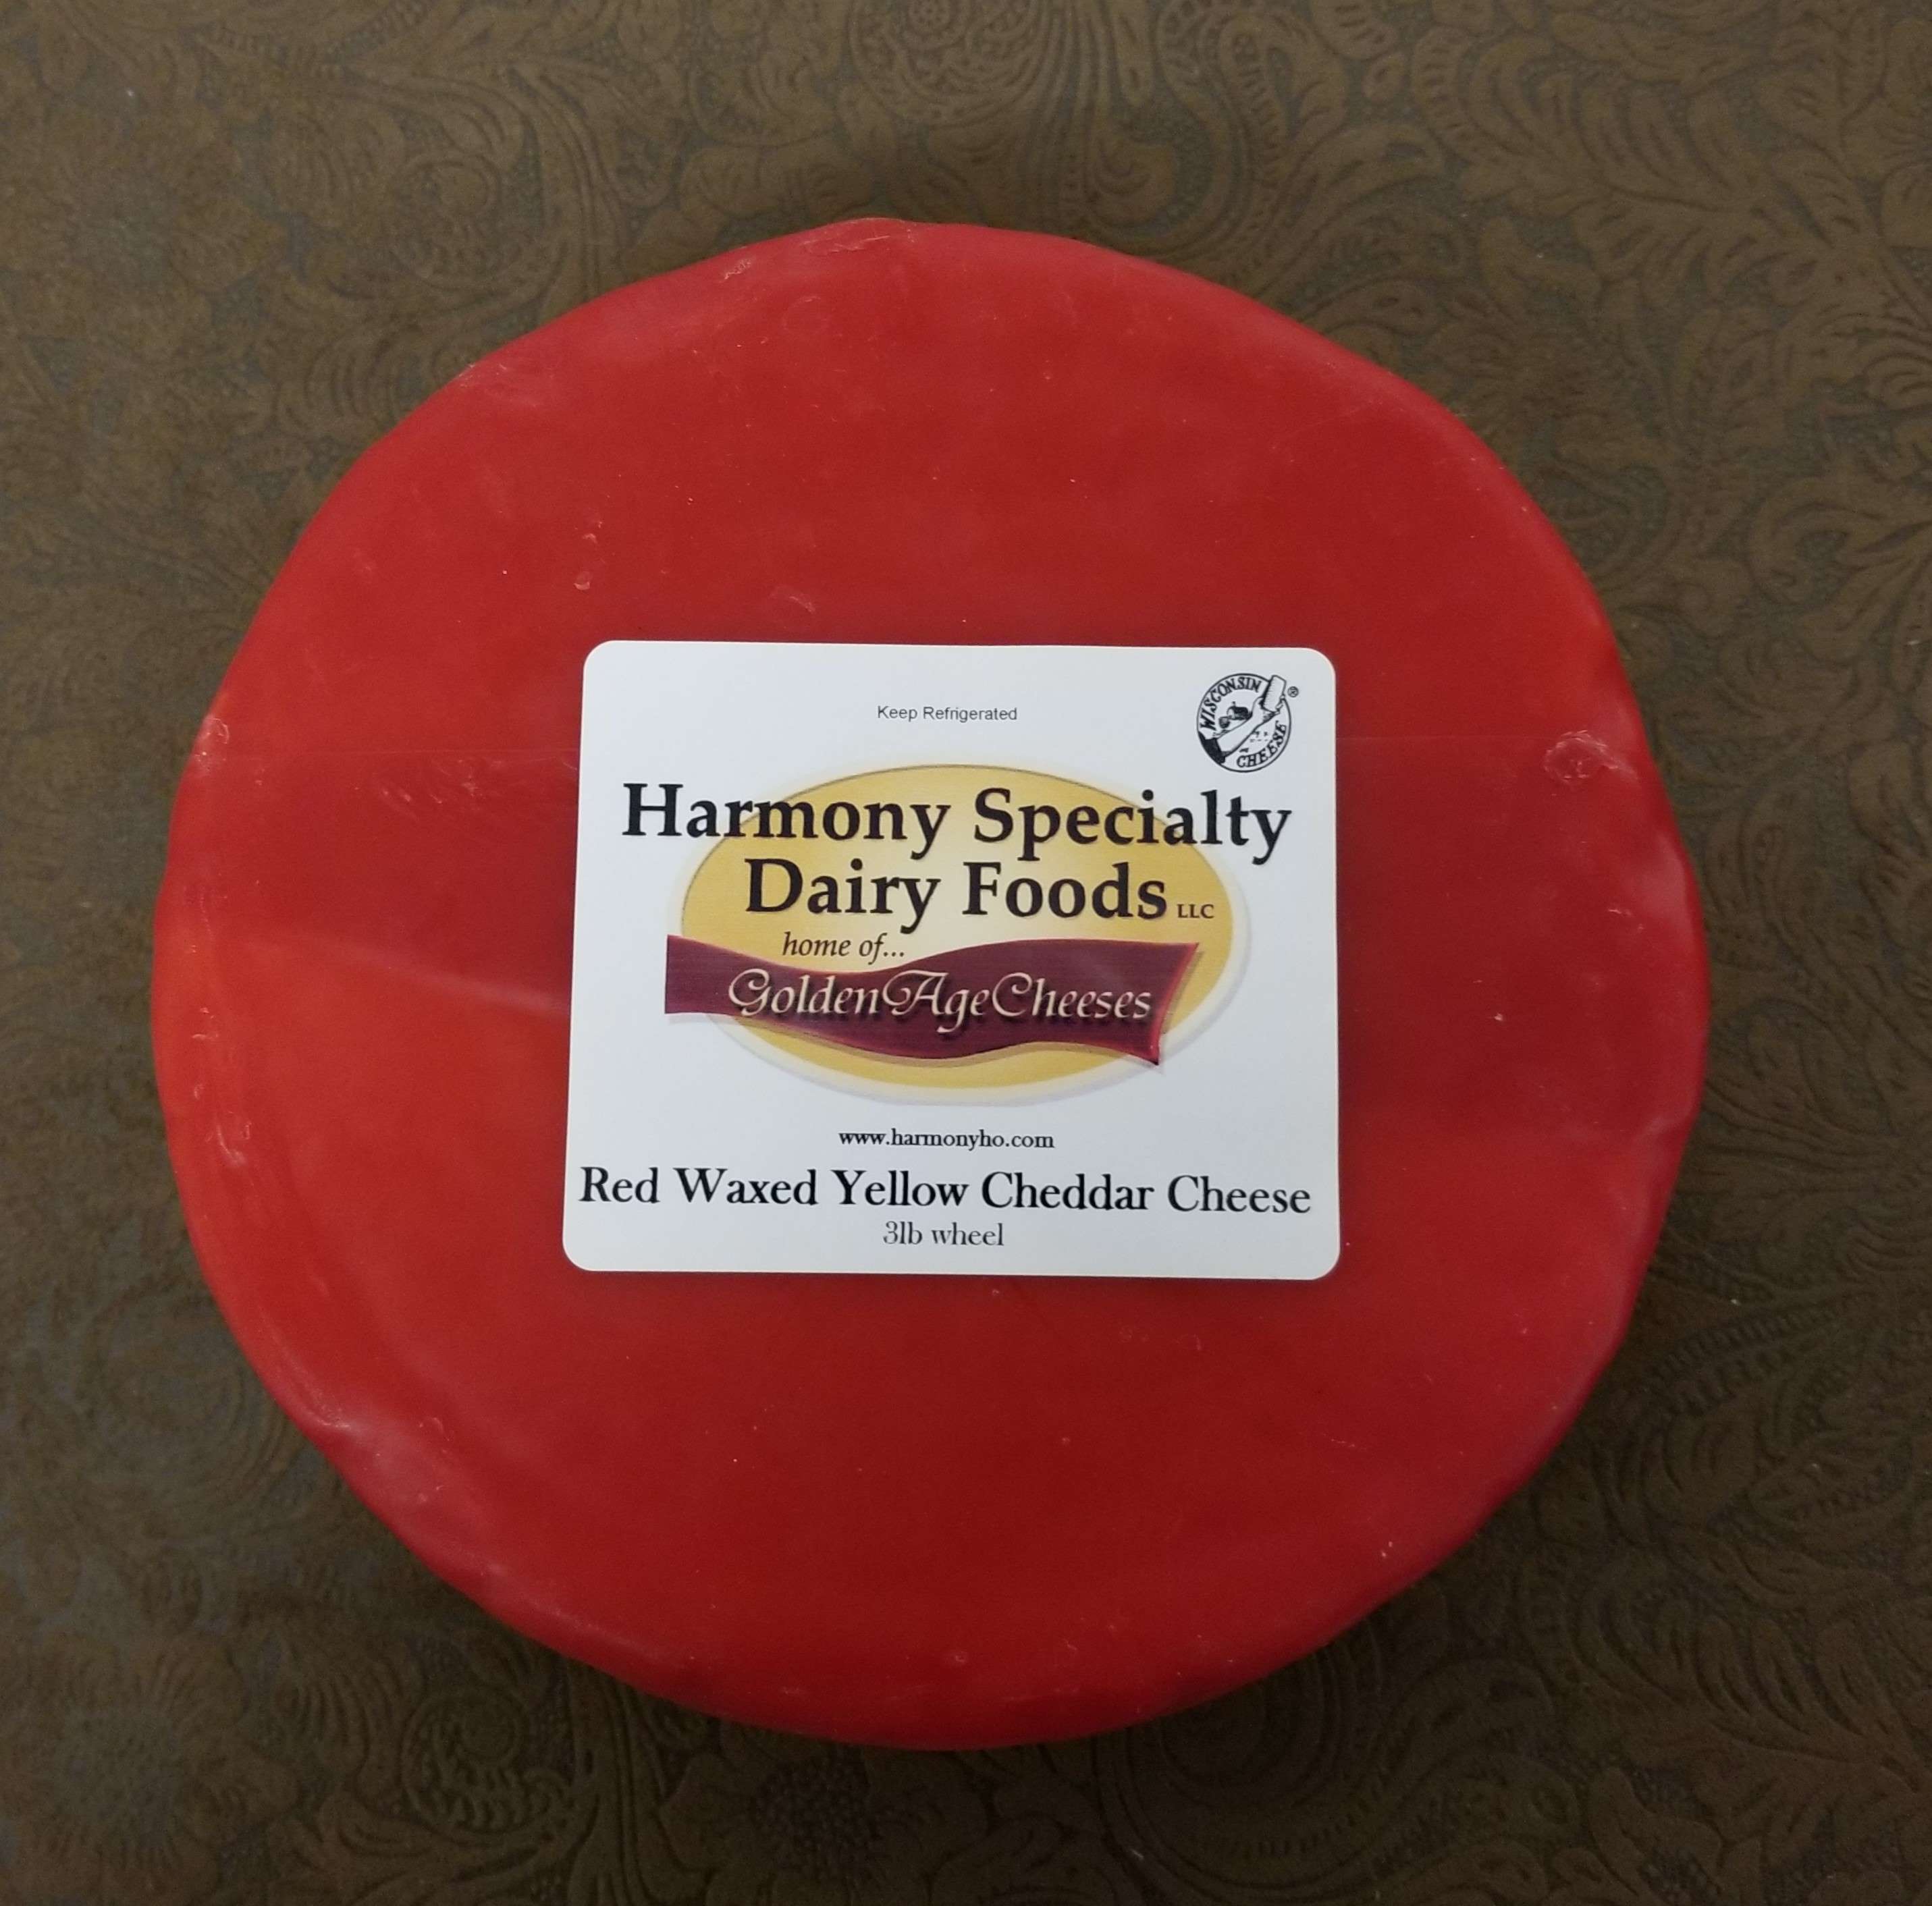 Example of a waxed cheese wheel that can be private labeled